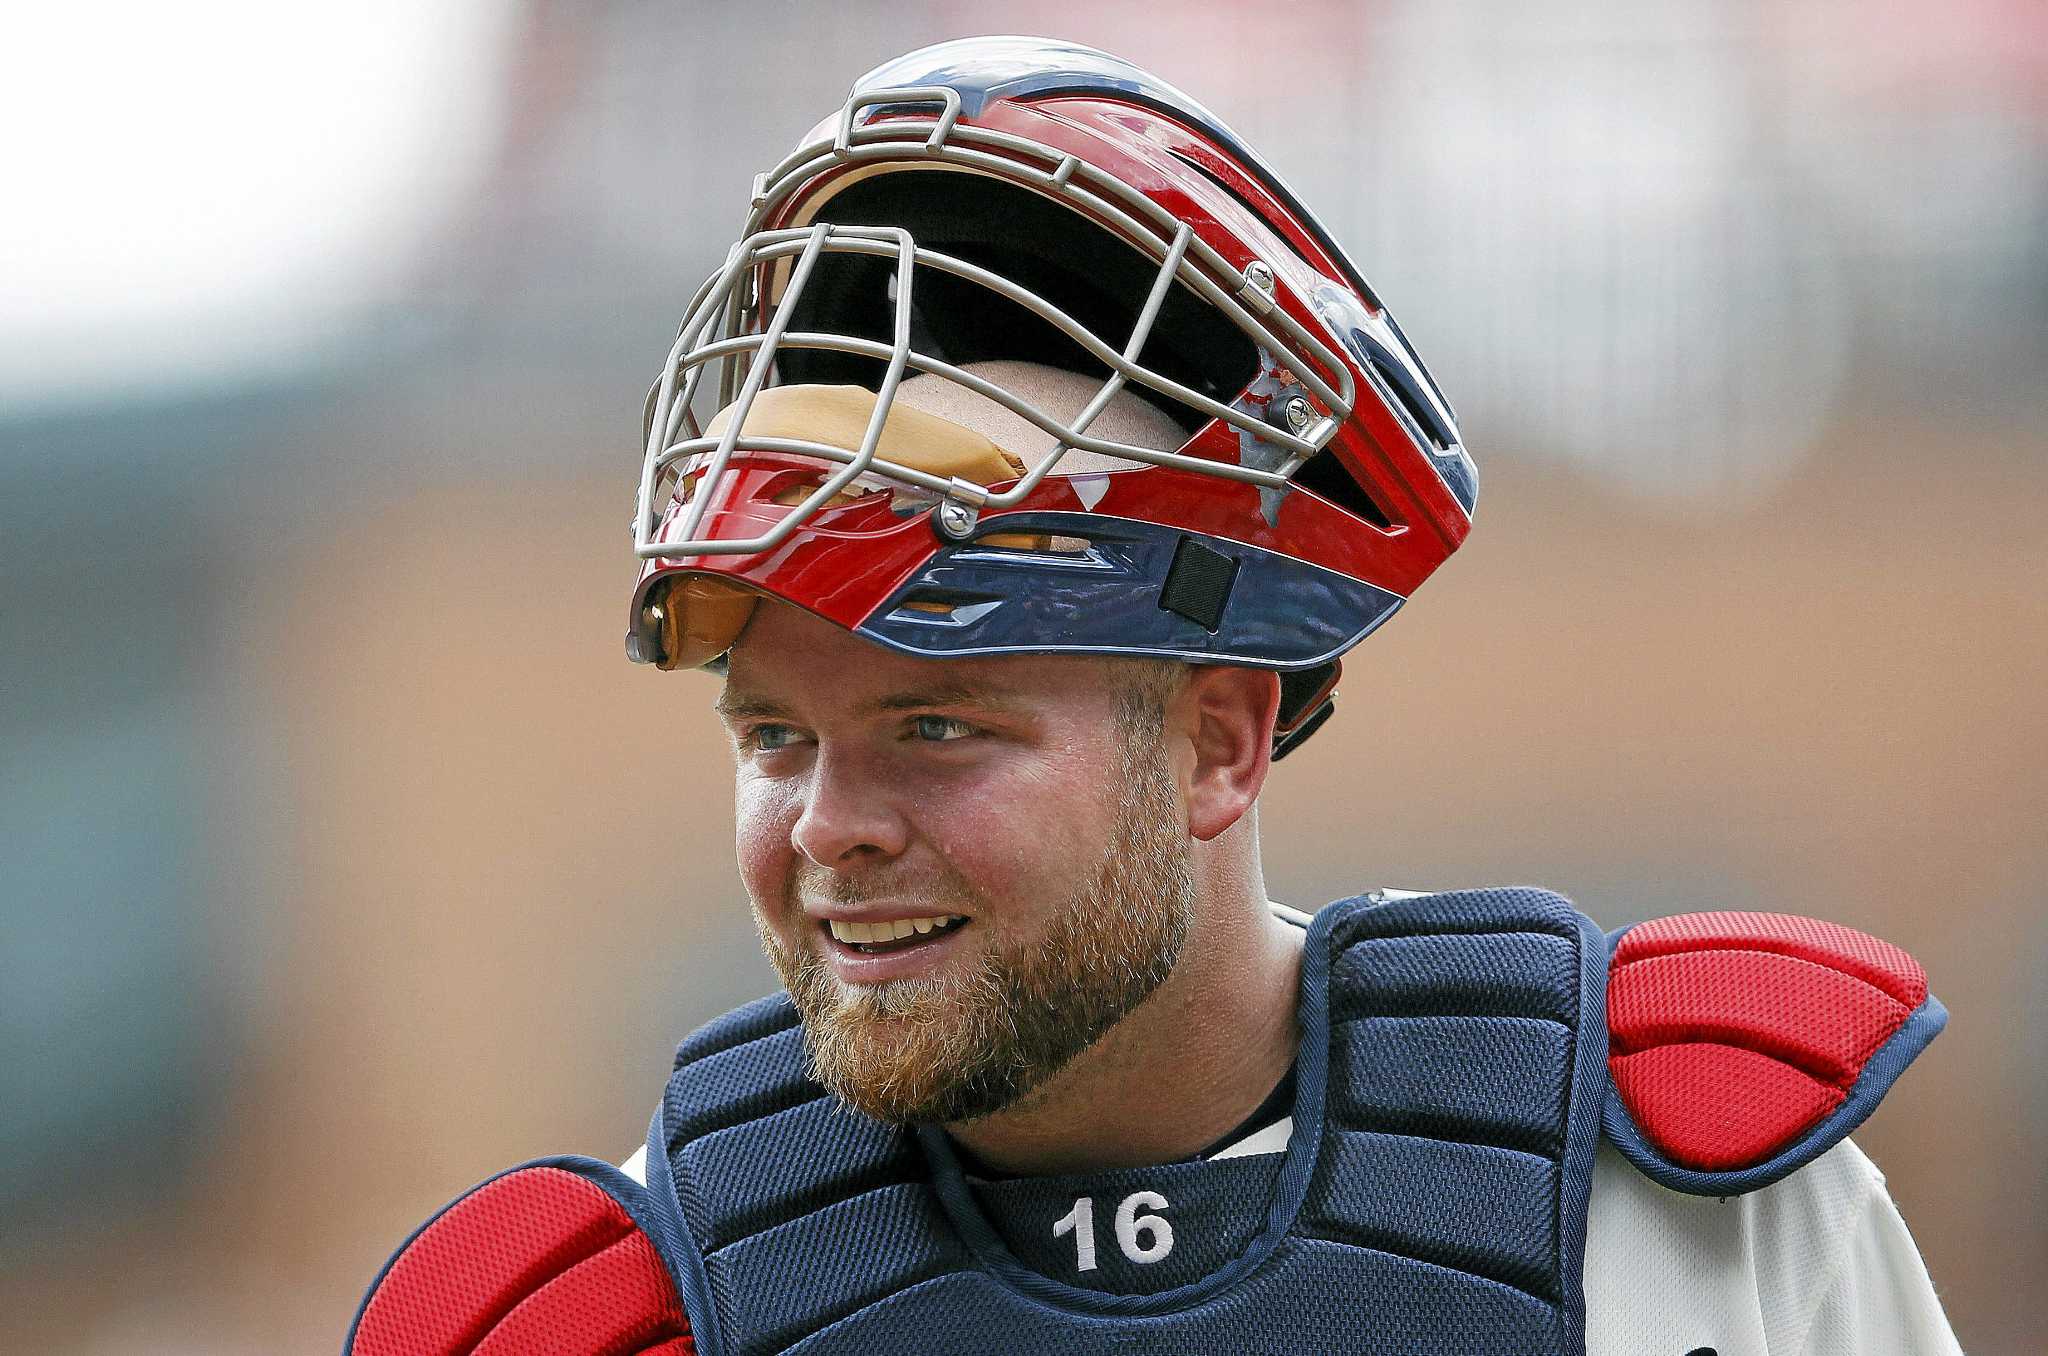 Brian McCann, Yankees complete $85M, 5-year contract